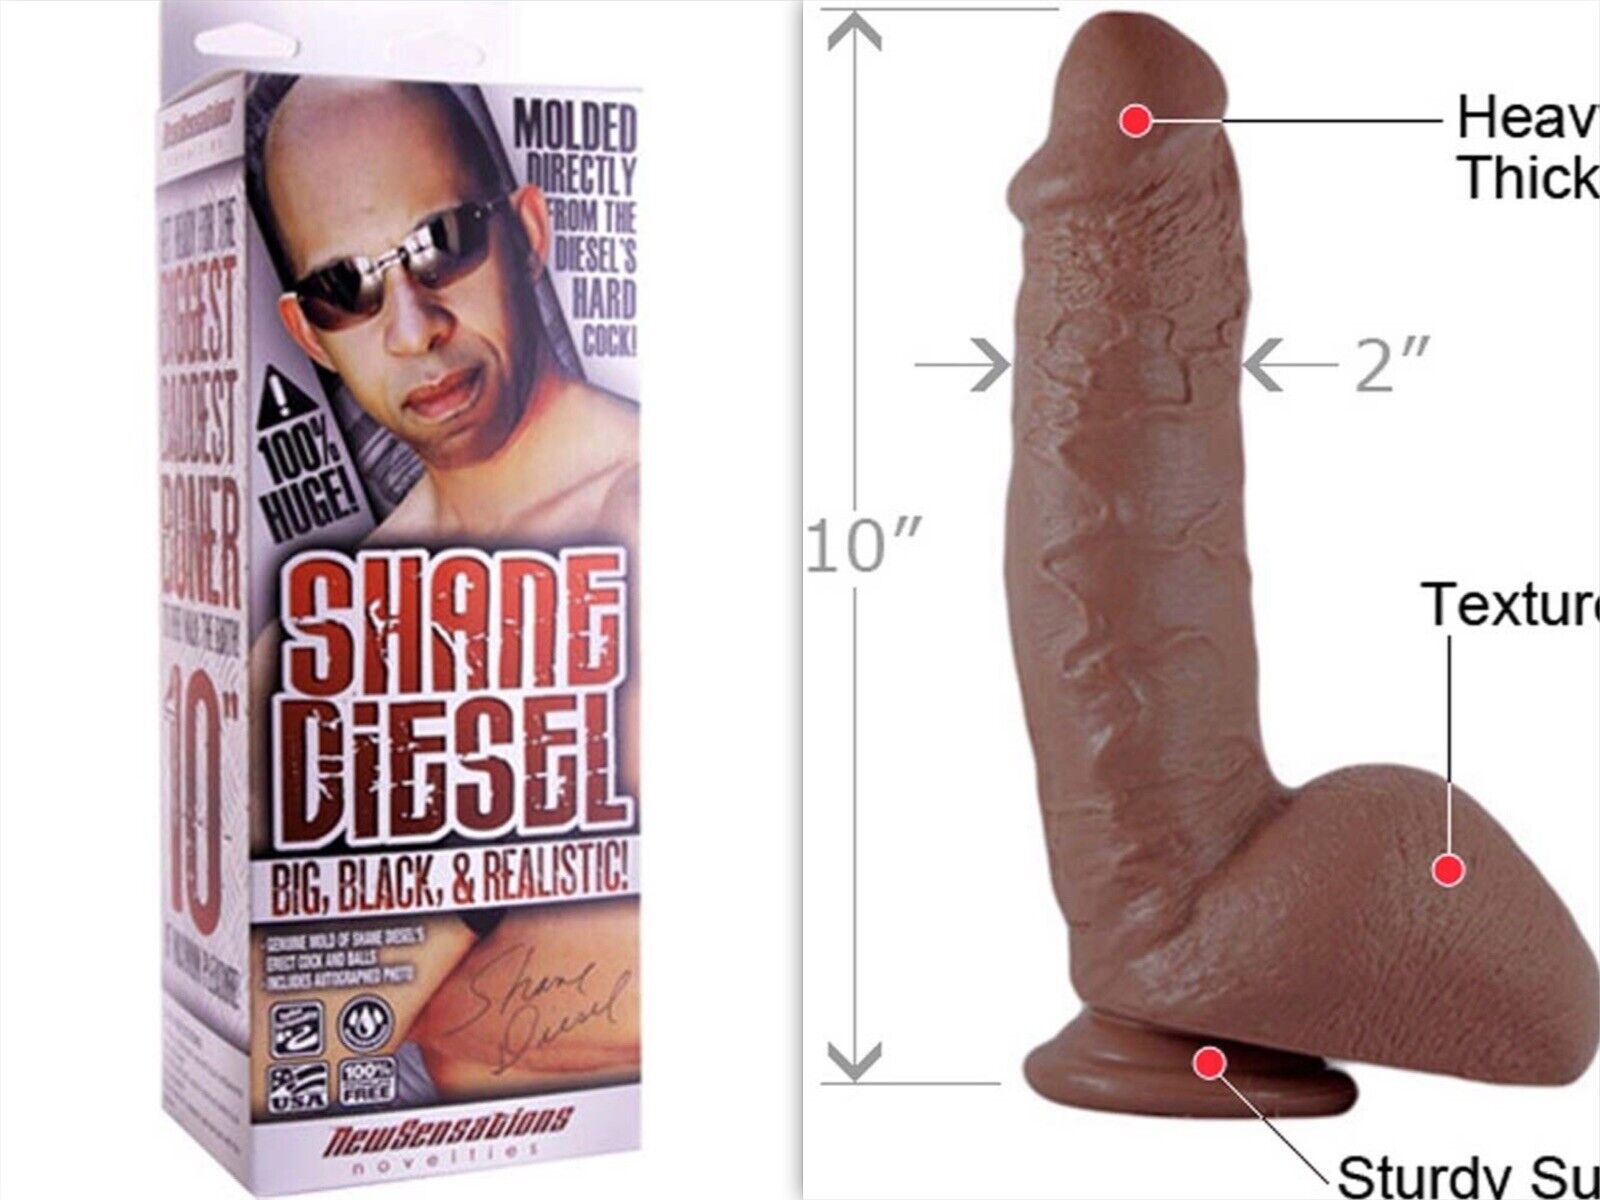 dorothy negri recommends shane diesel dick size pic